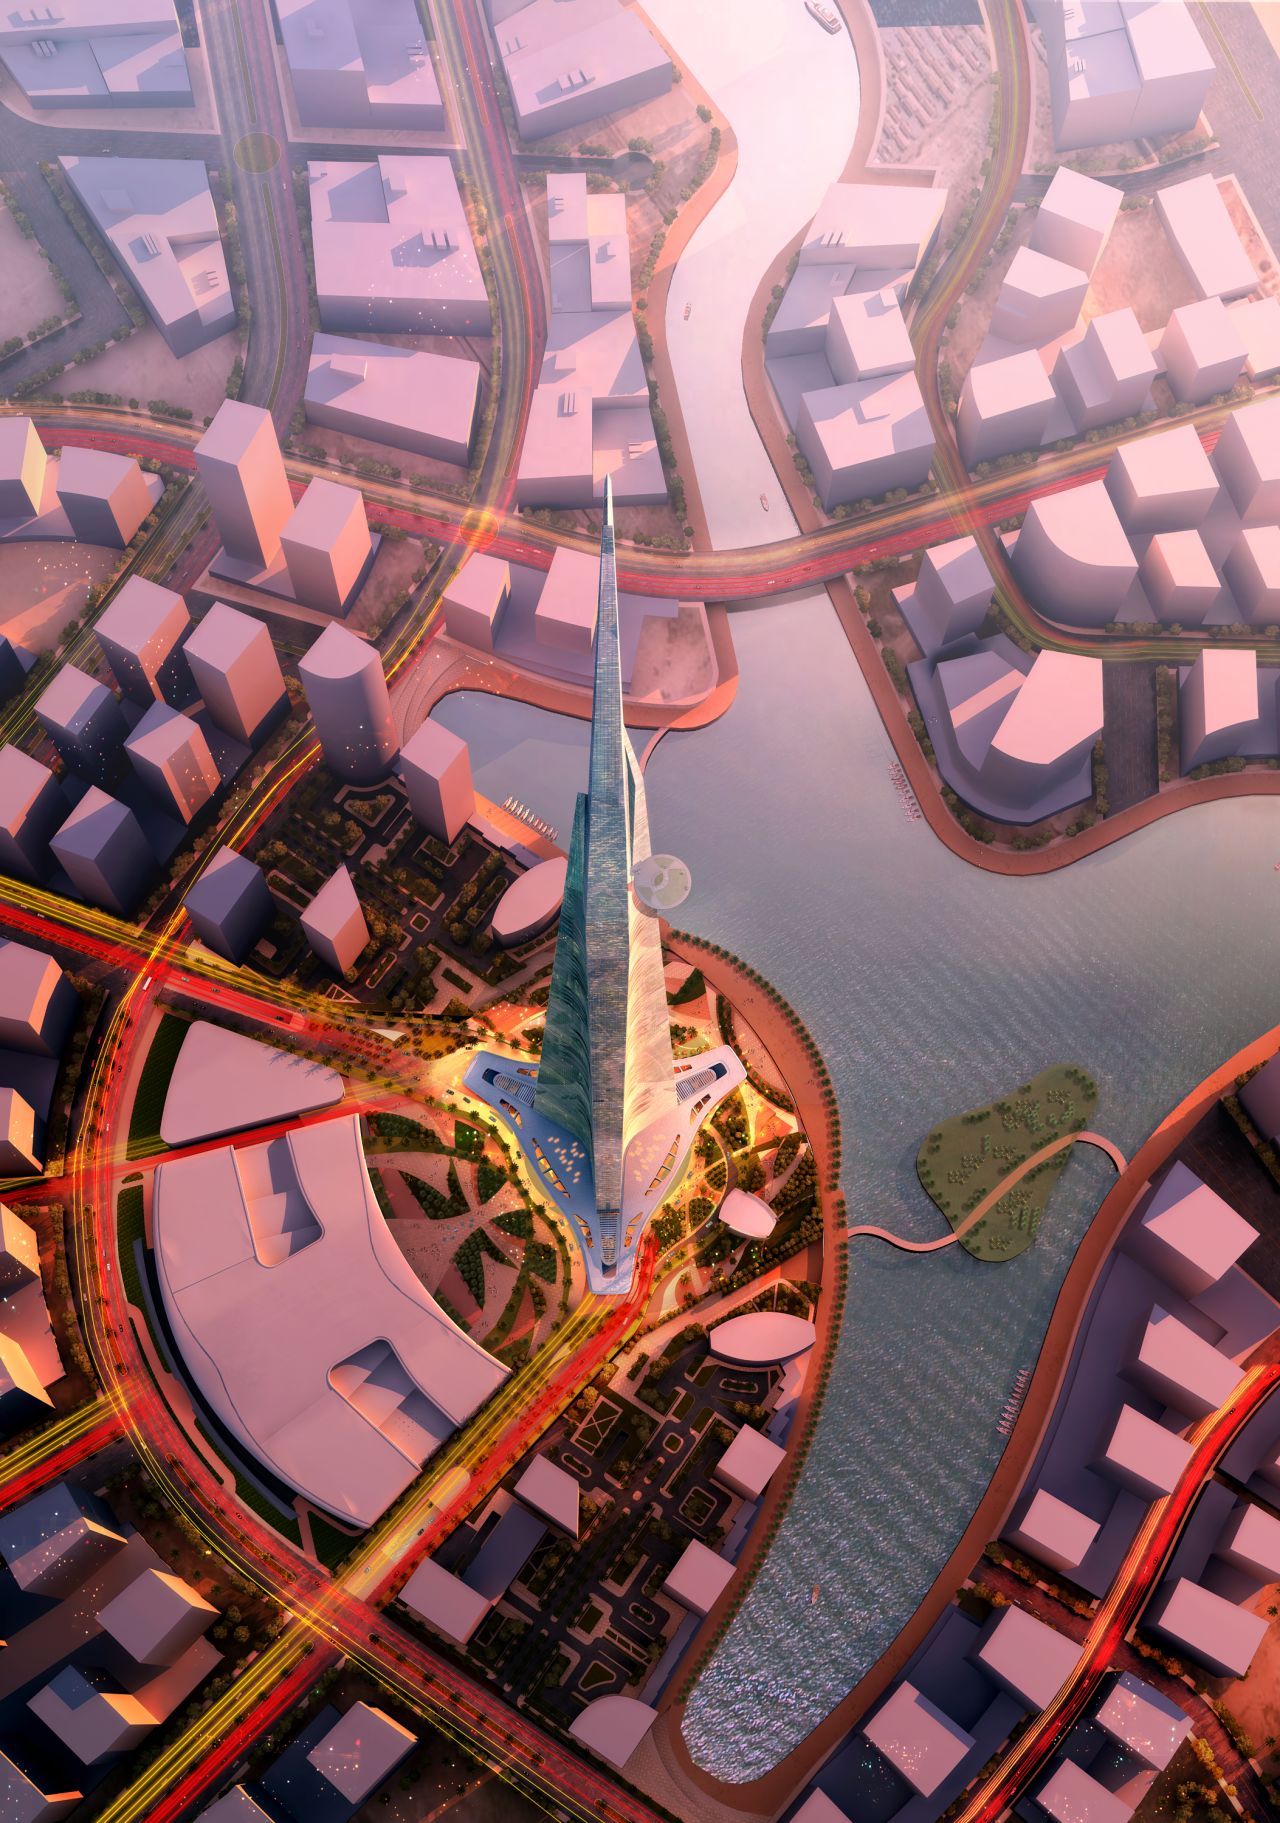 Another threat to the Burj Khalifa's tallest building title is the Jeddah Tower in Saudi Arabia. The tower is currently under construction and due to top out at 1,000 meters at a cost of <a href="http://edition.cnn.com/2015/11/30/world/meast/saudi-arabia-worlds-tallest-building-jeddah-tower/">$1.23 billion</a>.<br /><br /><strong>Height: </strong>3,280ft <br /><strong>Architect: </strong>Adrian Smith + Gordon Gill Architecture